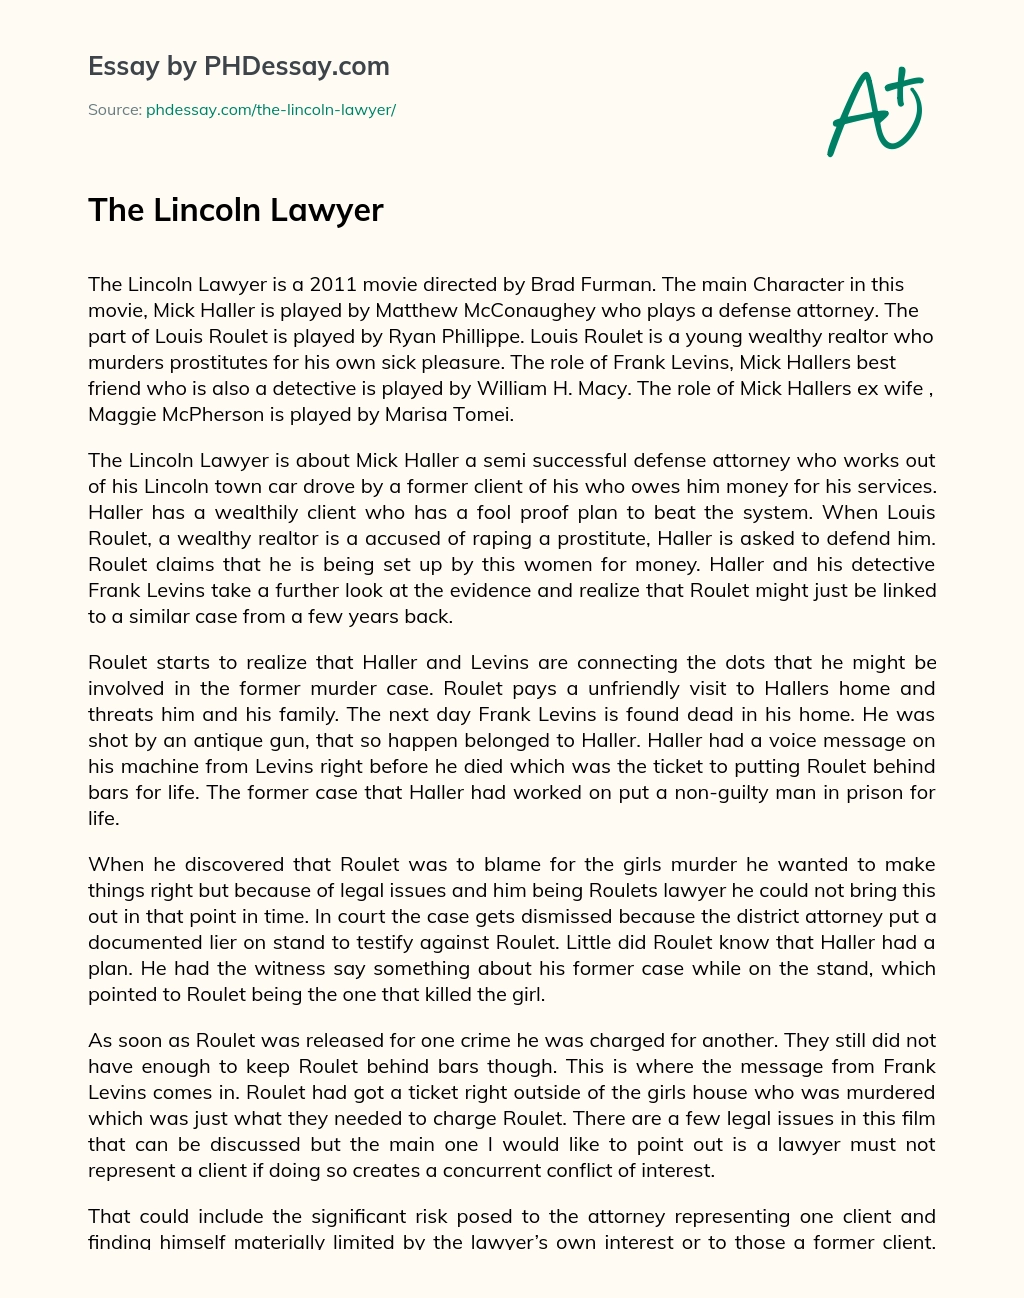 The Lincoln Lawyer essay